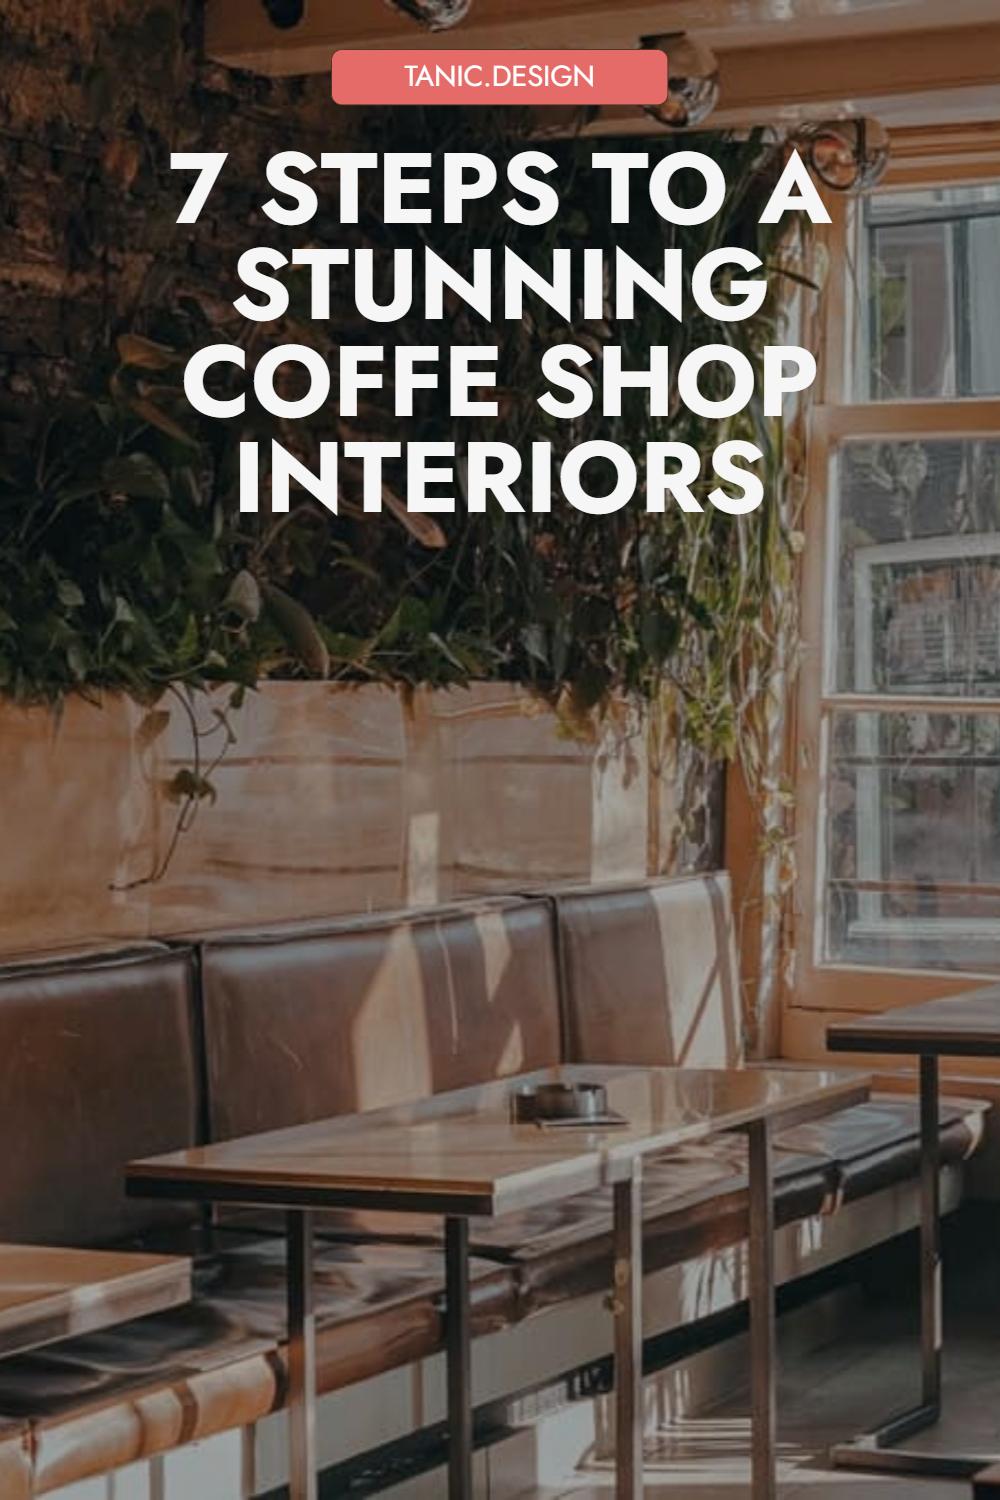  Steps to Achieving a Stunning Coffee Shop Interior Design